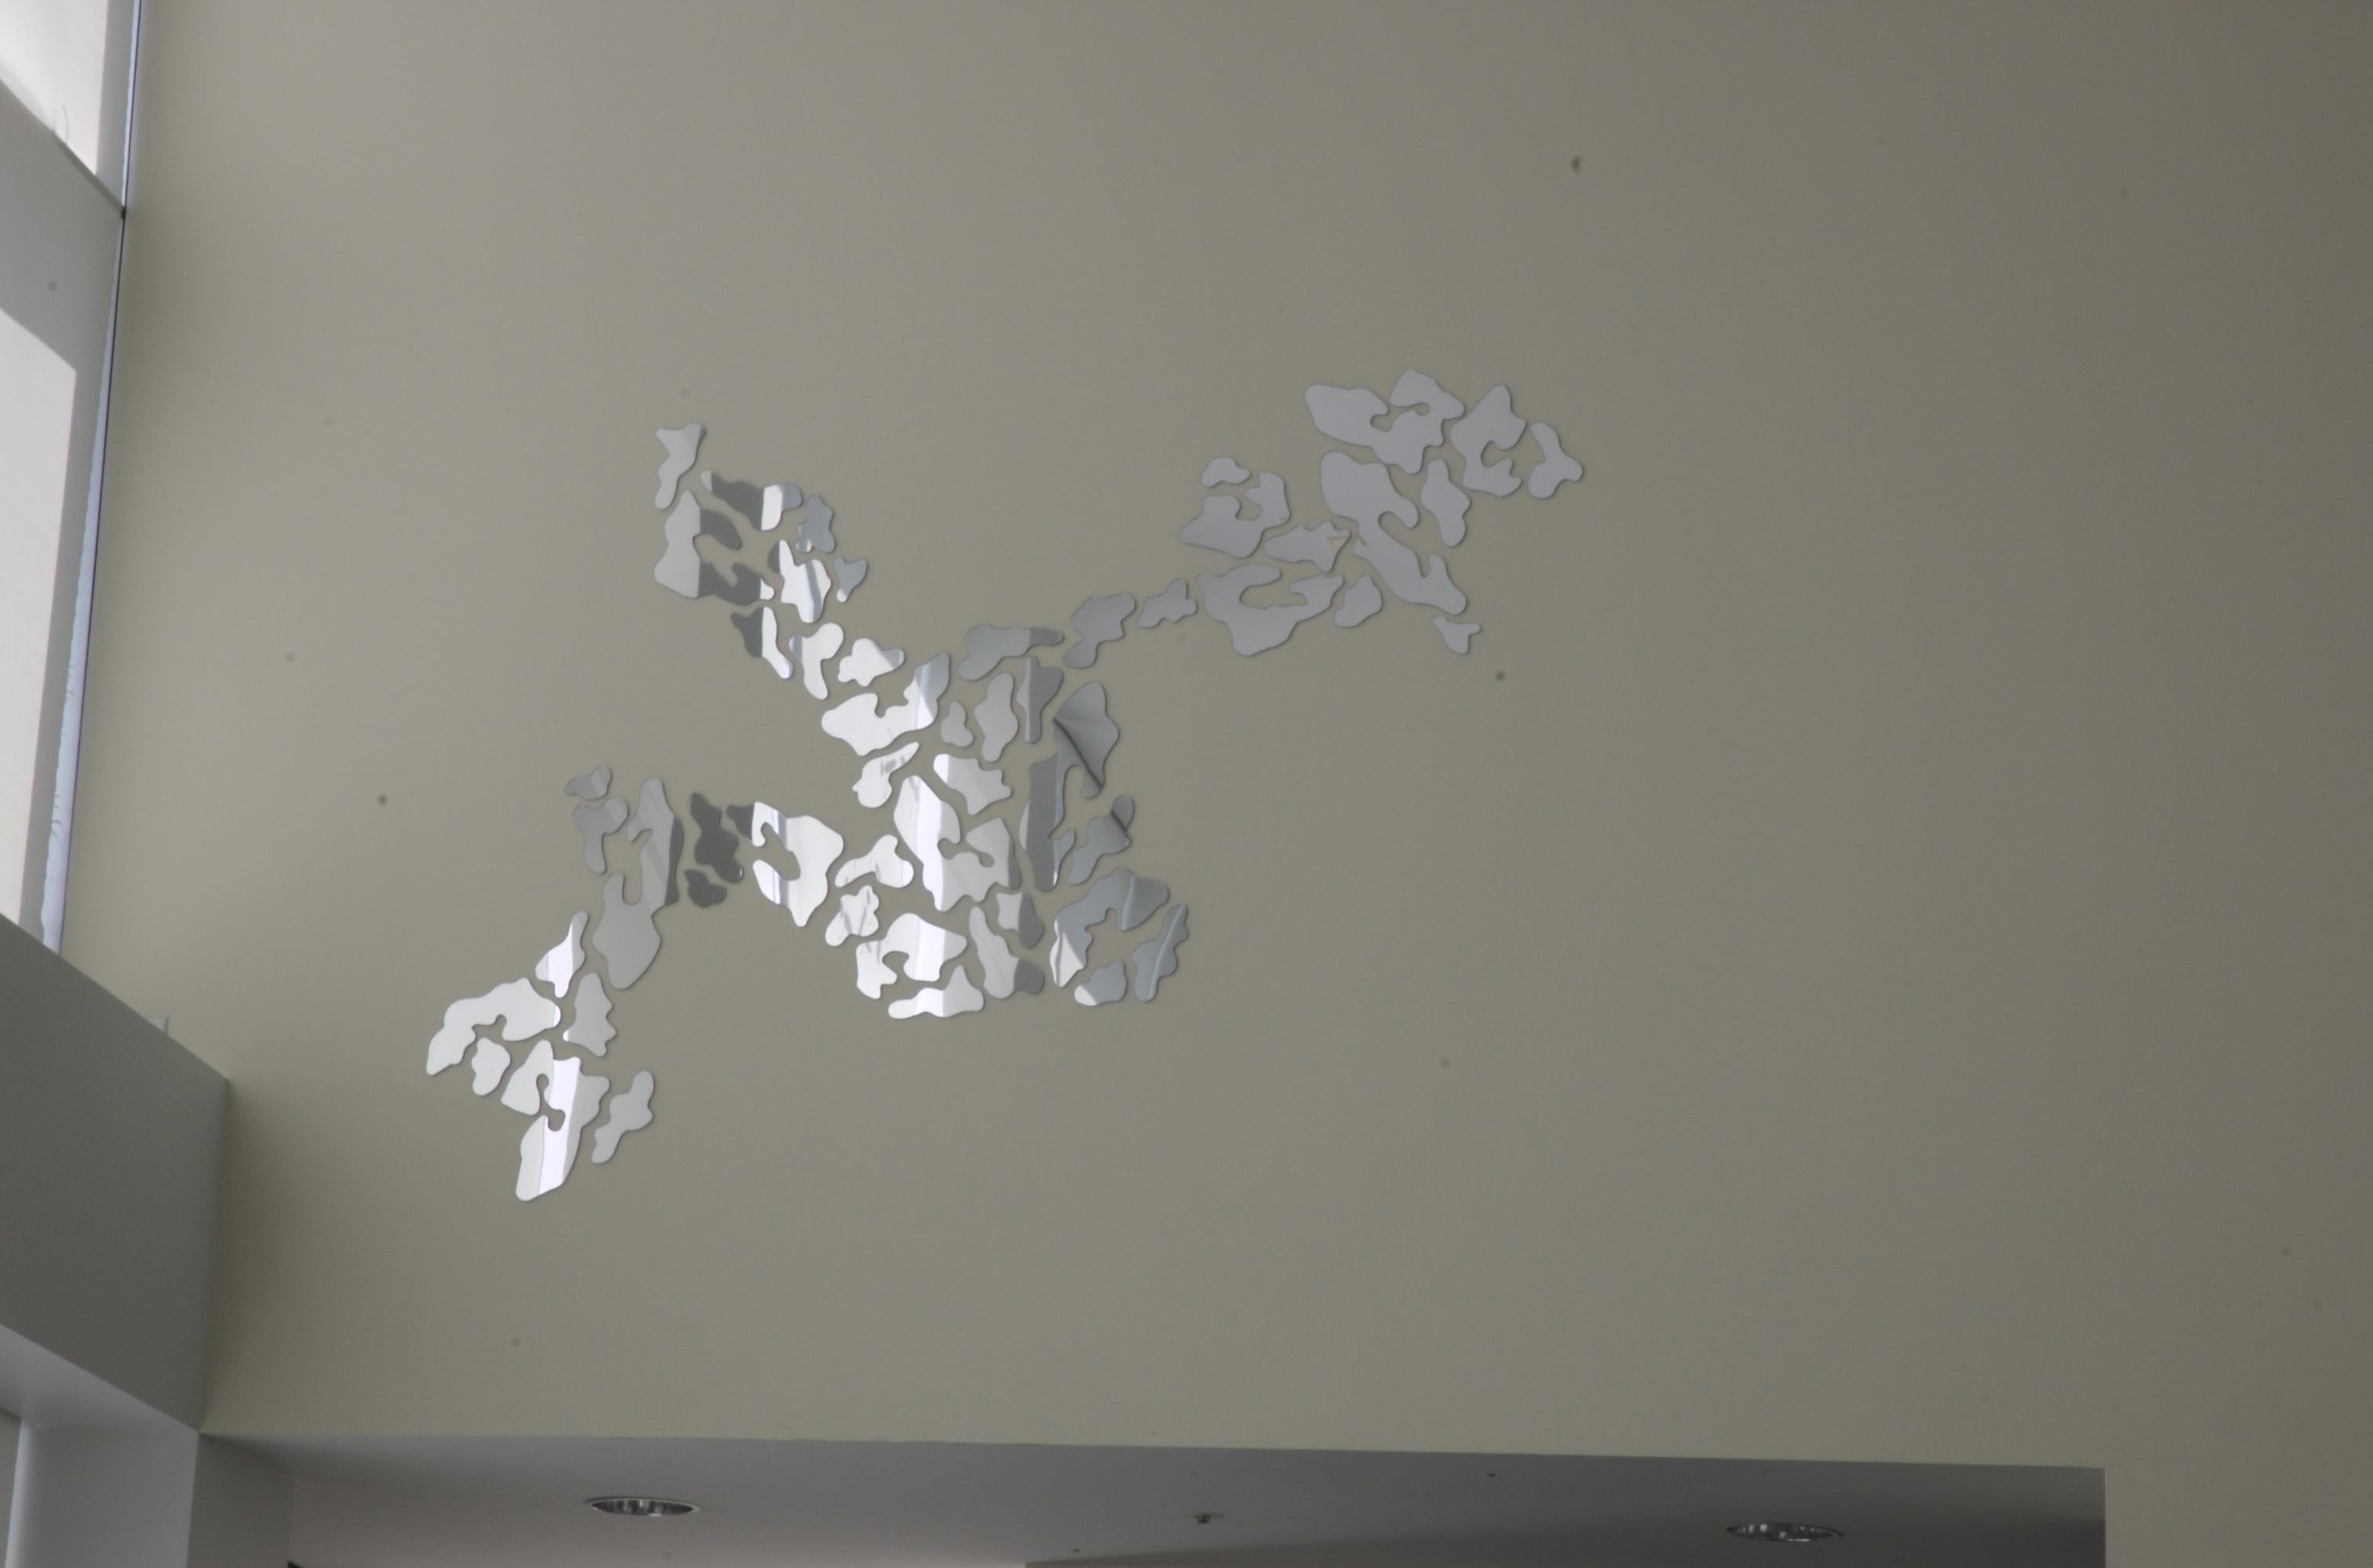 Fragmented mirror pieces adhered to a white wall form a jagged shape.